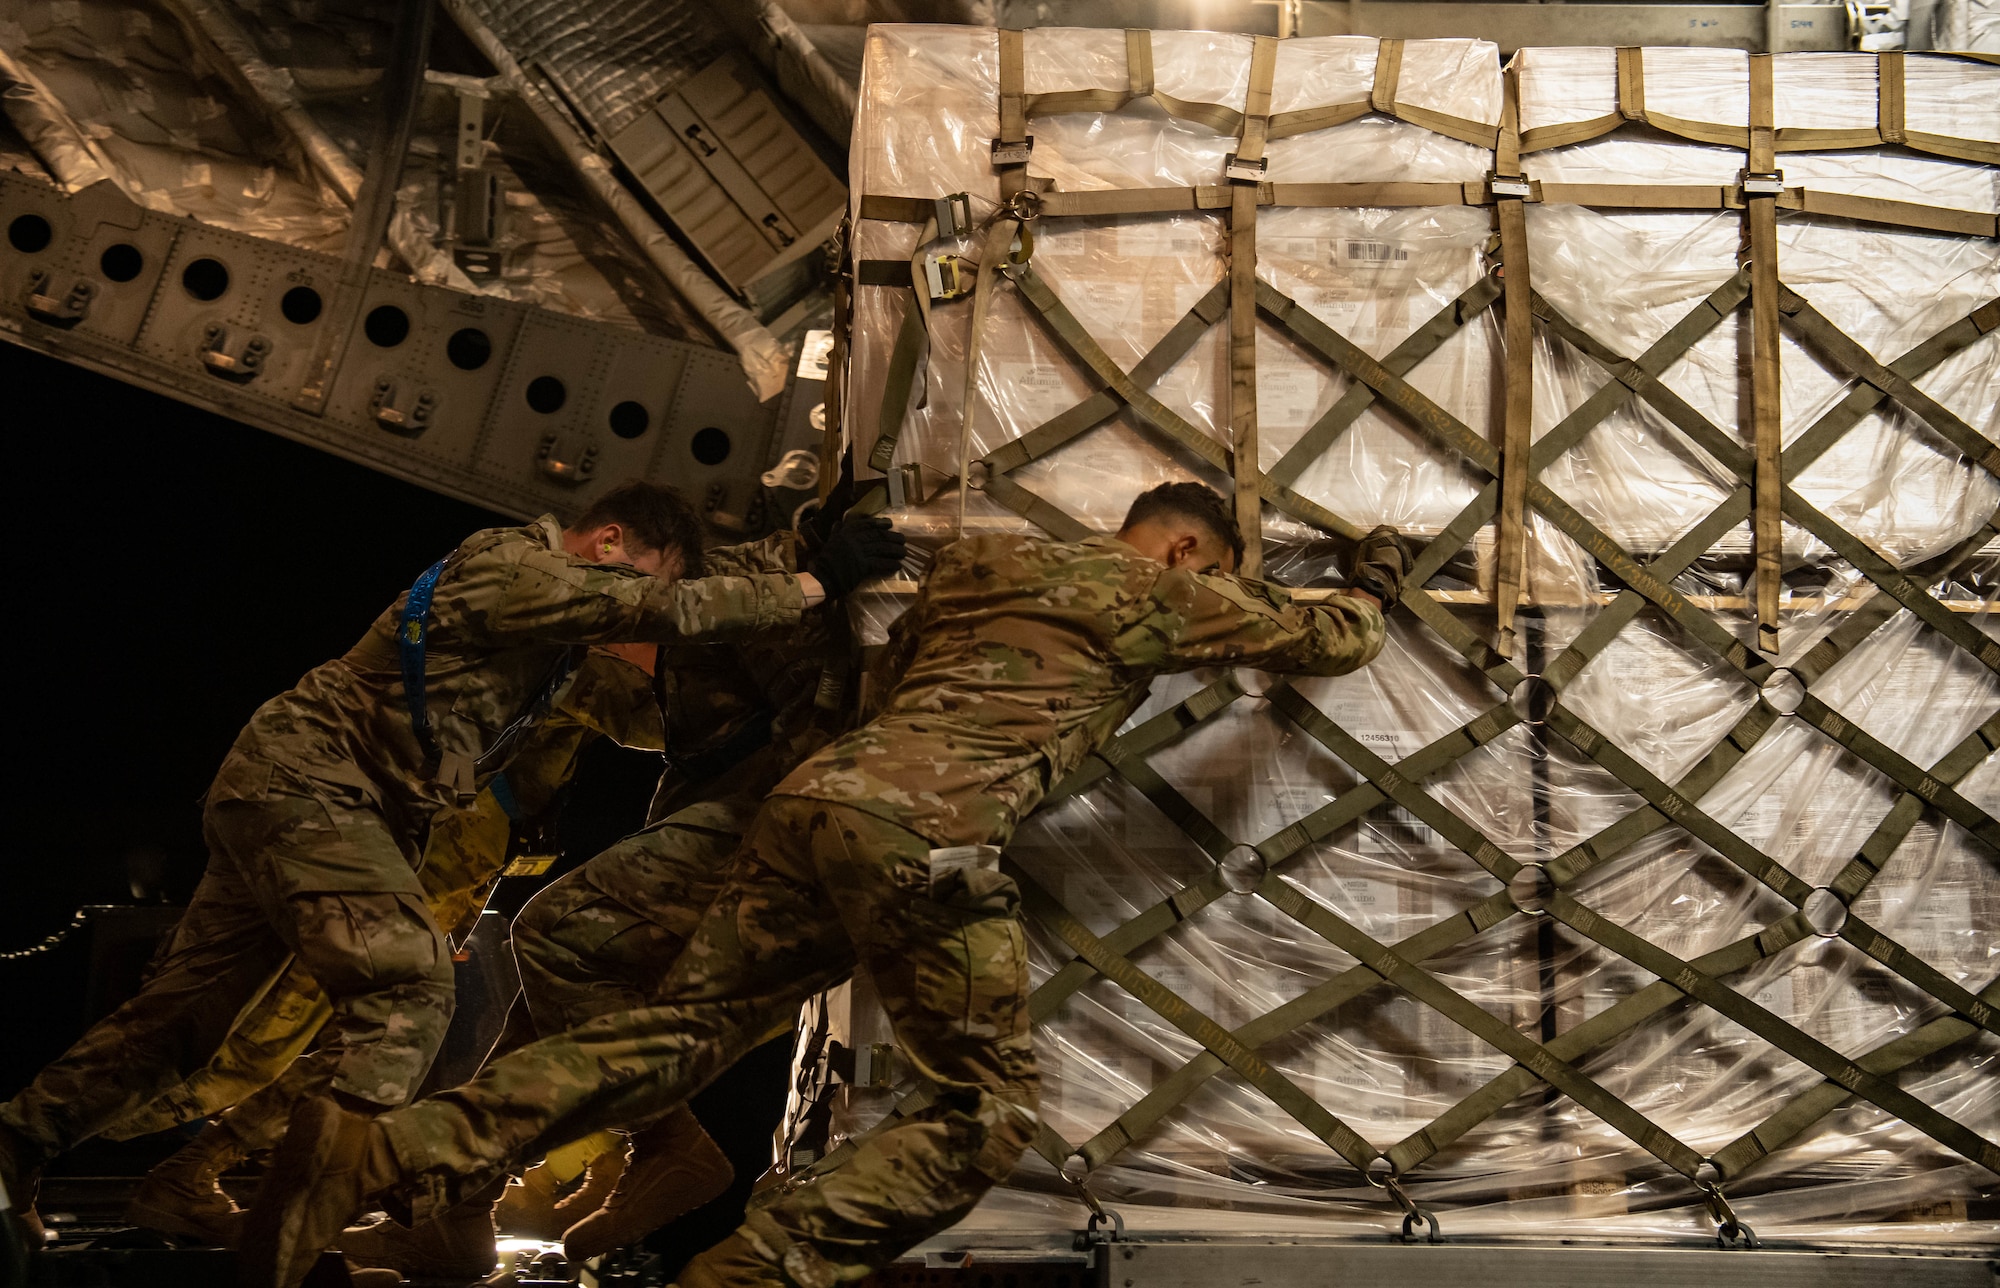 Airmen from the 721st Aerial Port Squadron load a pallet of infant formula onto a C-17 Globemaster lll aircraft assigned to Joint Base Pearl Harbor-Hickam, Hawaii, at Ramstein Air Base, Germany, May 22, 2022. The infant formula arrived from Switzerland as part of the U.S. Government’s Operation Fly Formula to rapidly transport infant formula to the United States due to critical shortages there. Under Operation Fly Formula, the USDA and the Department of Health and Human Services are authorized to request Department of Defense support to pick up overseas infant formula that meets U.S. health and safety standards. (U.S. Air Force photo by Airman 1st Class Jared Lovett)